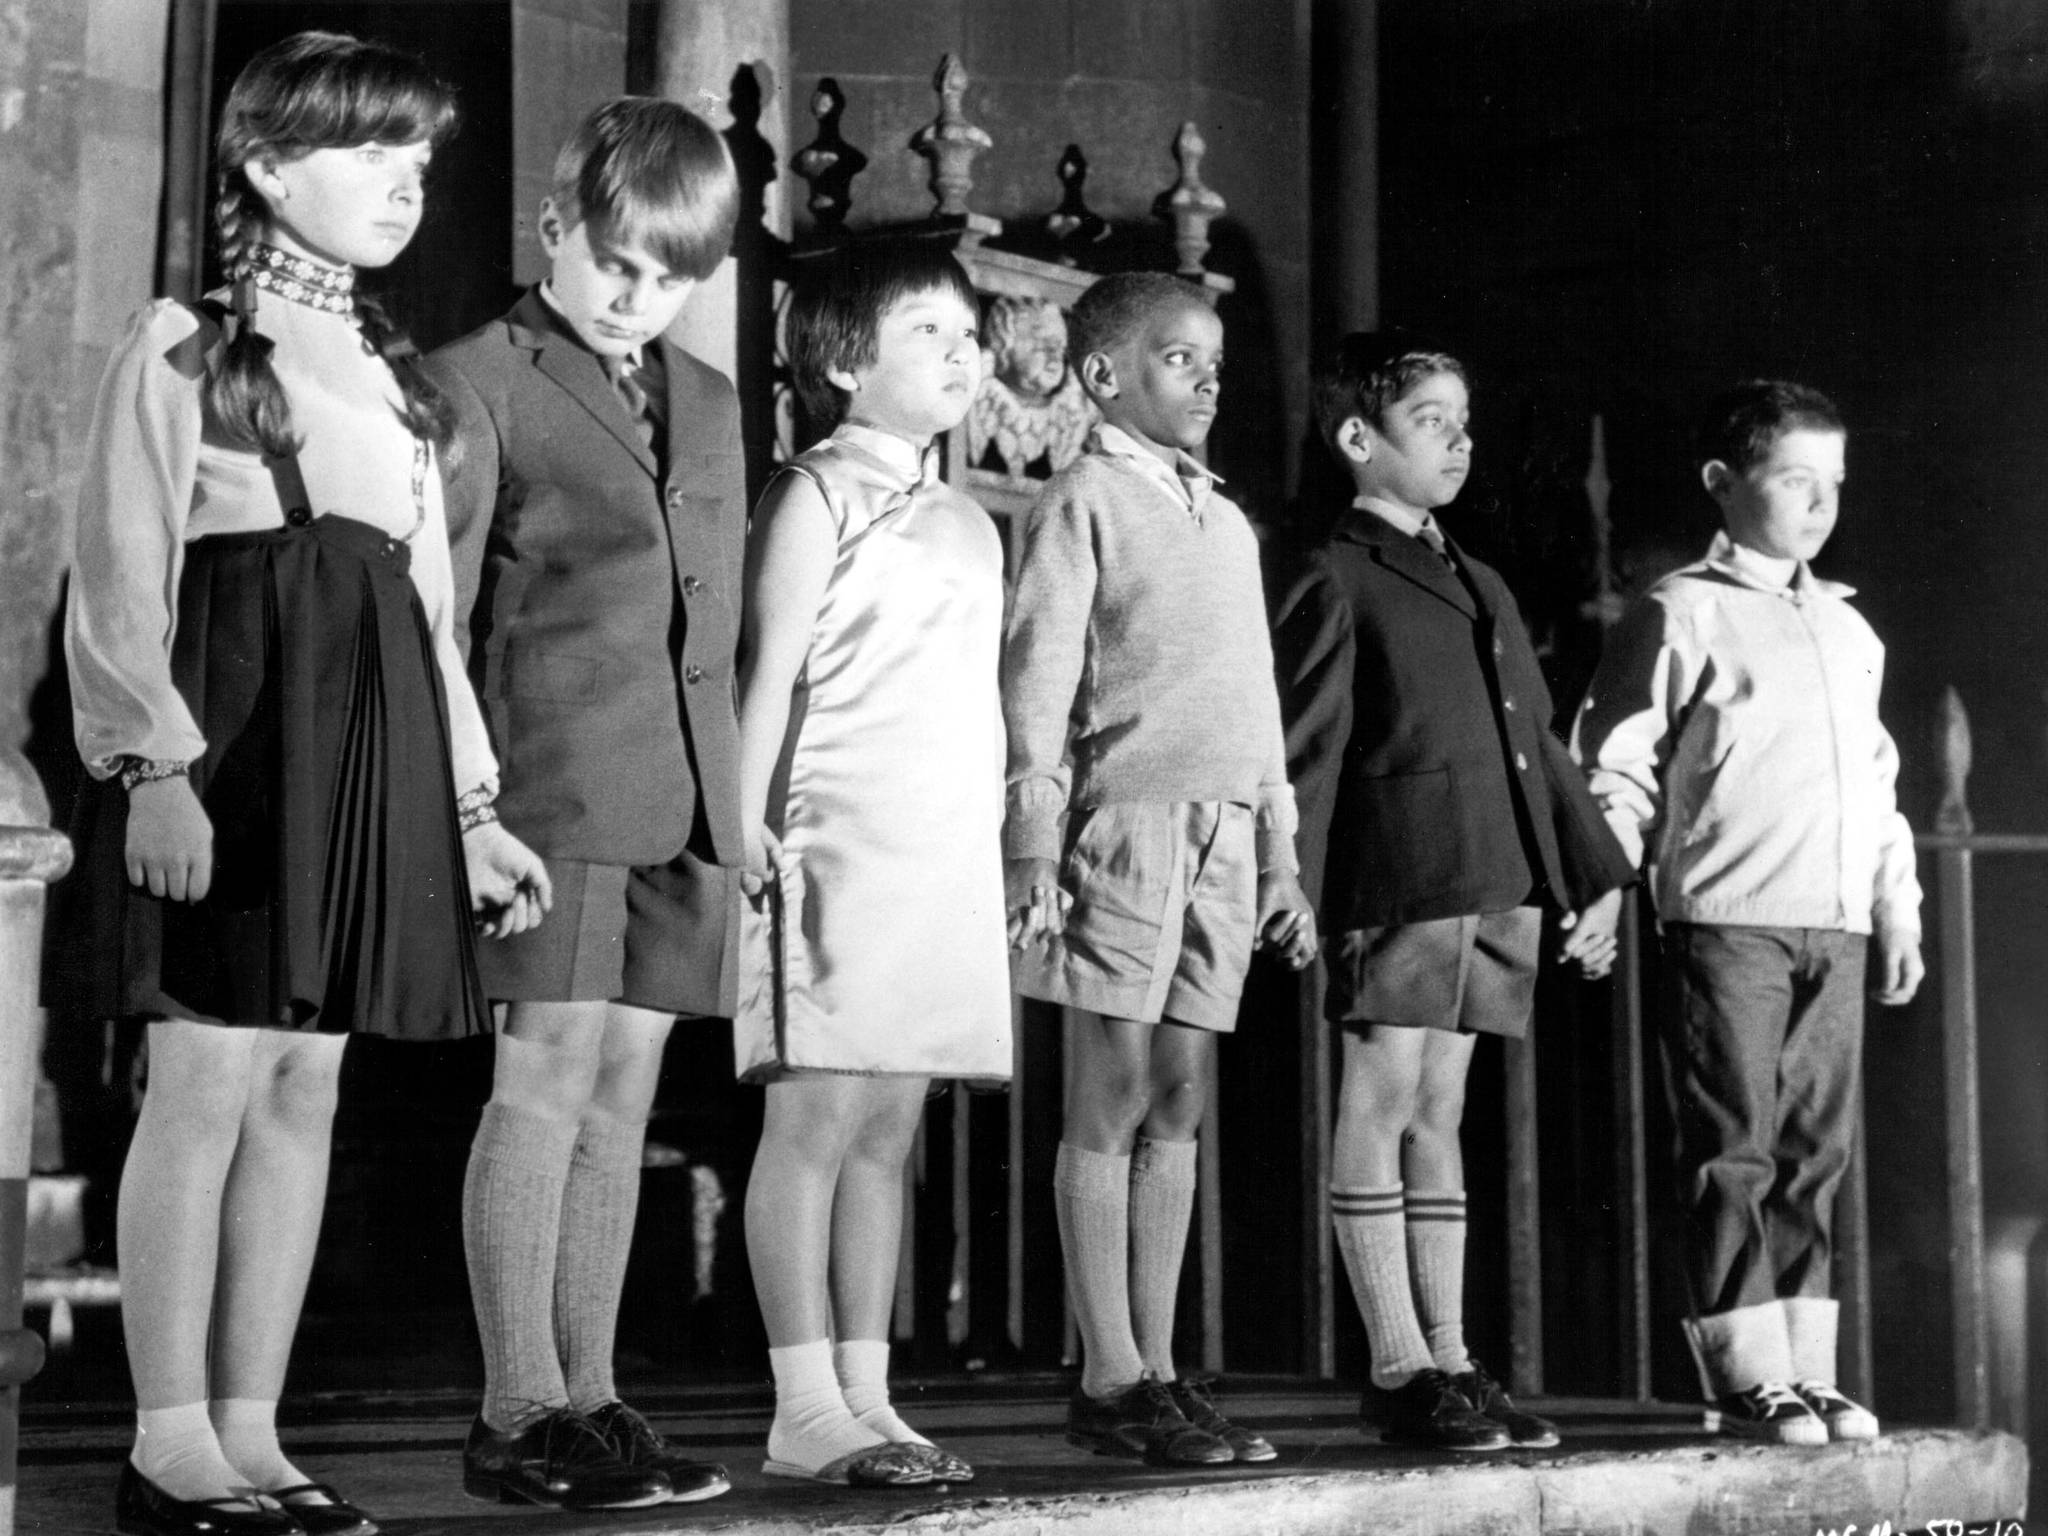 The children - (l to r) Roberta Rex, Alfred Burke, Lee Yoke-Moon, Gerald Delsol, Mahdu Mathers and Frank Summerscale in Children of the Damned (1964)